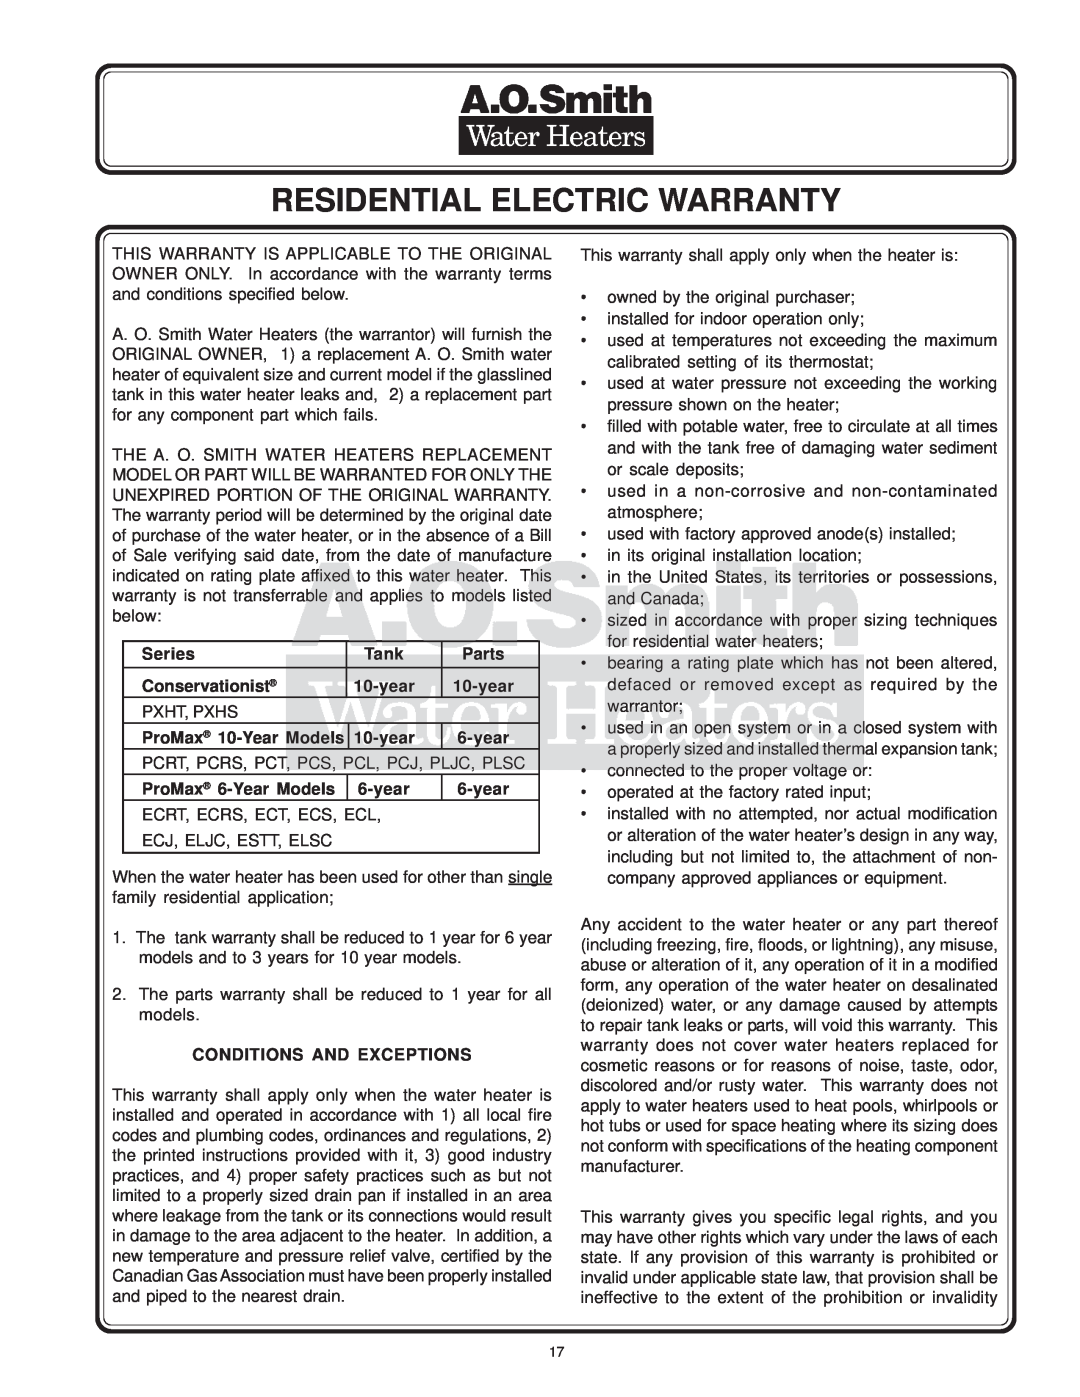 A.O. Smith WATER HEATERS instruction manual Residential Electric Warranty 